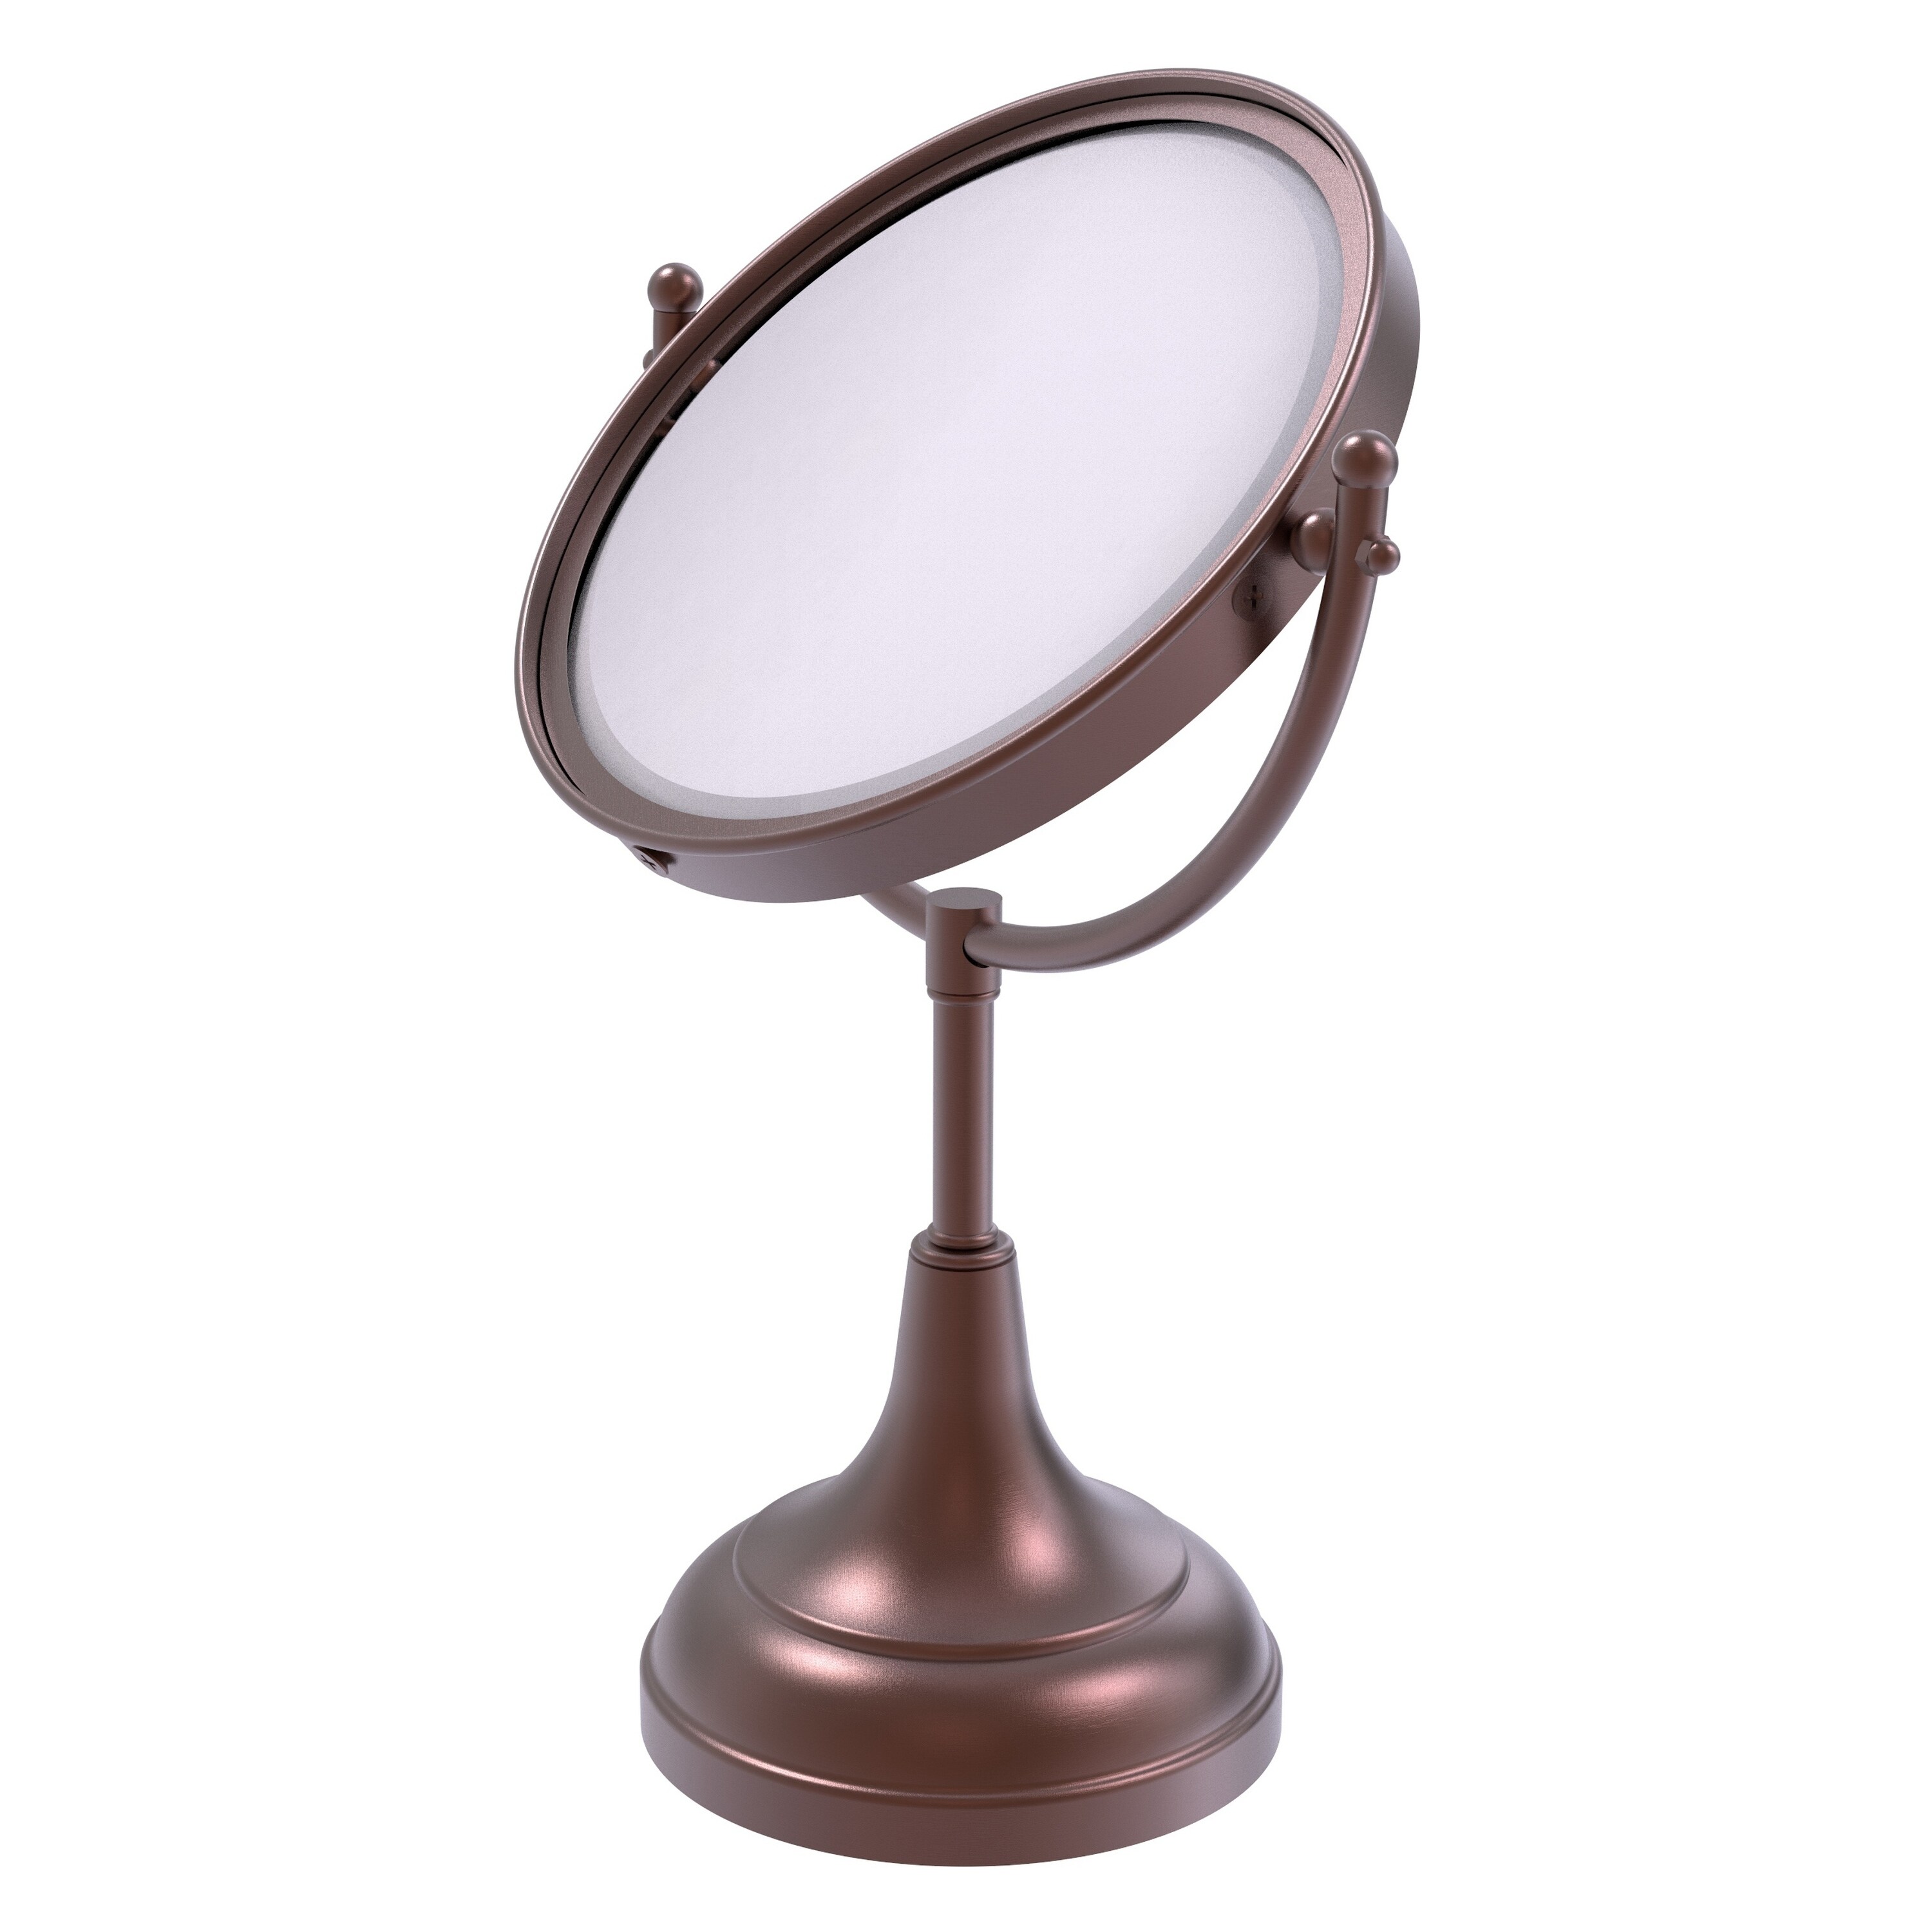 8-in x 15-in Antique Copper Double-sided 5X Magnifying Countertop Vanity Mirror | - Allied Brass DM-2/4X-CA